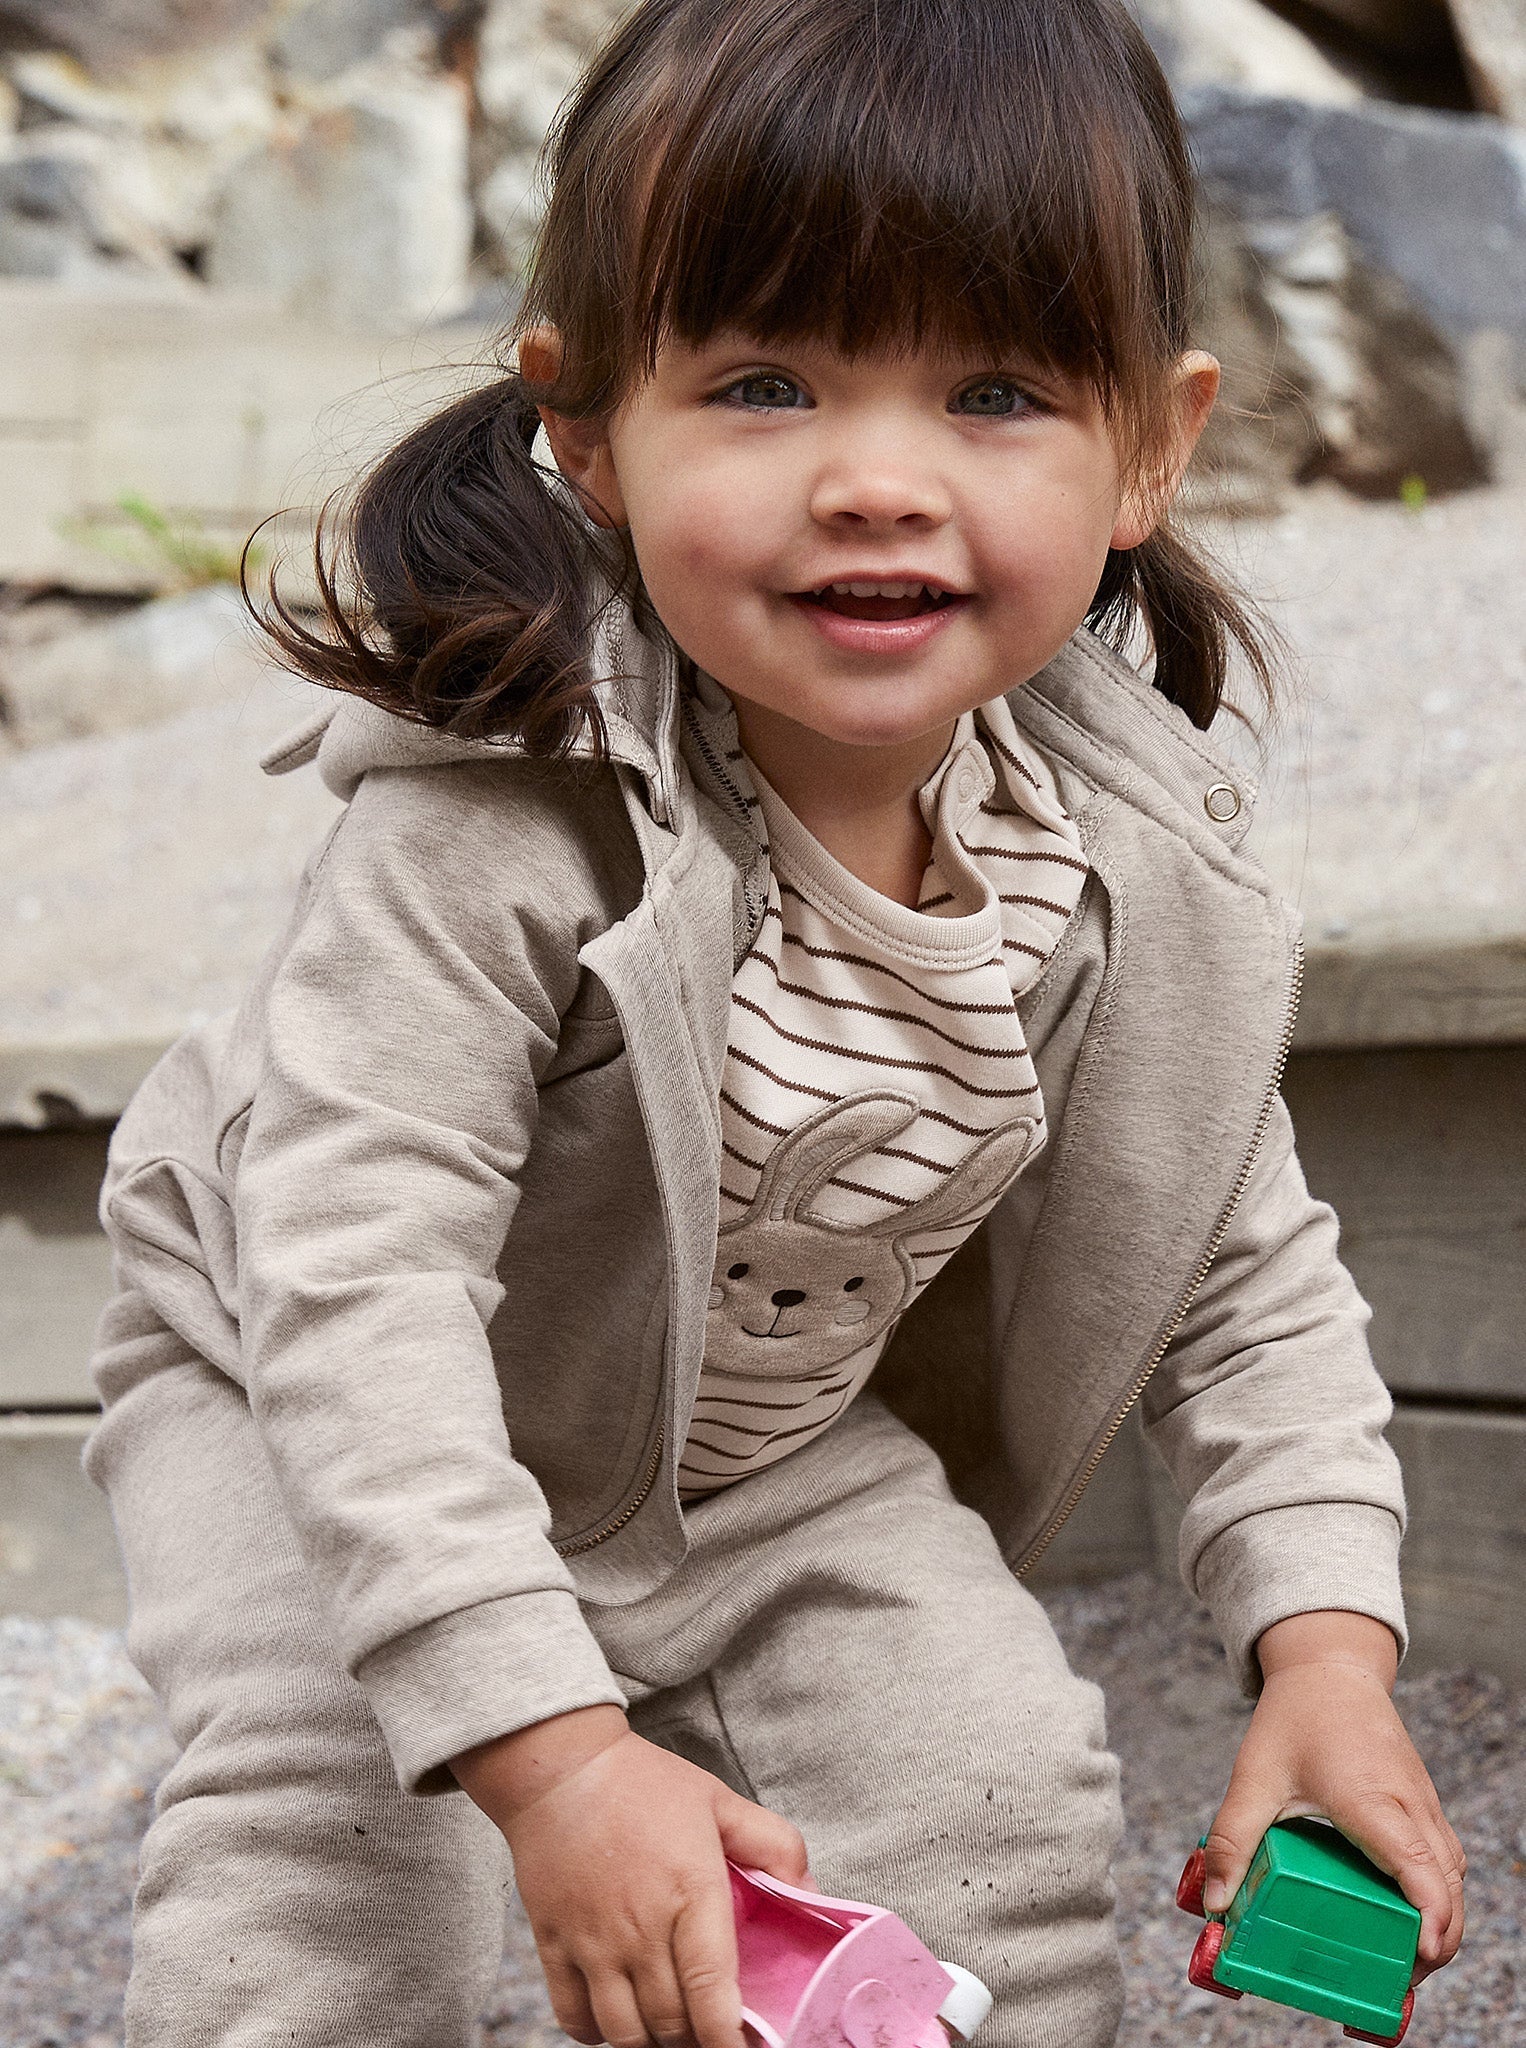 Beige Bunny Newborn Baby Top from the Polarn O. Pyret Kidswear collection. Ethically produced kids clothing.